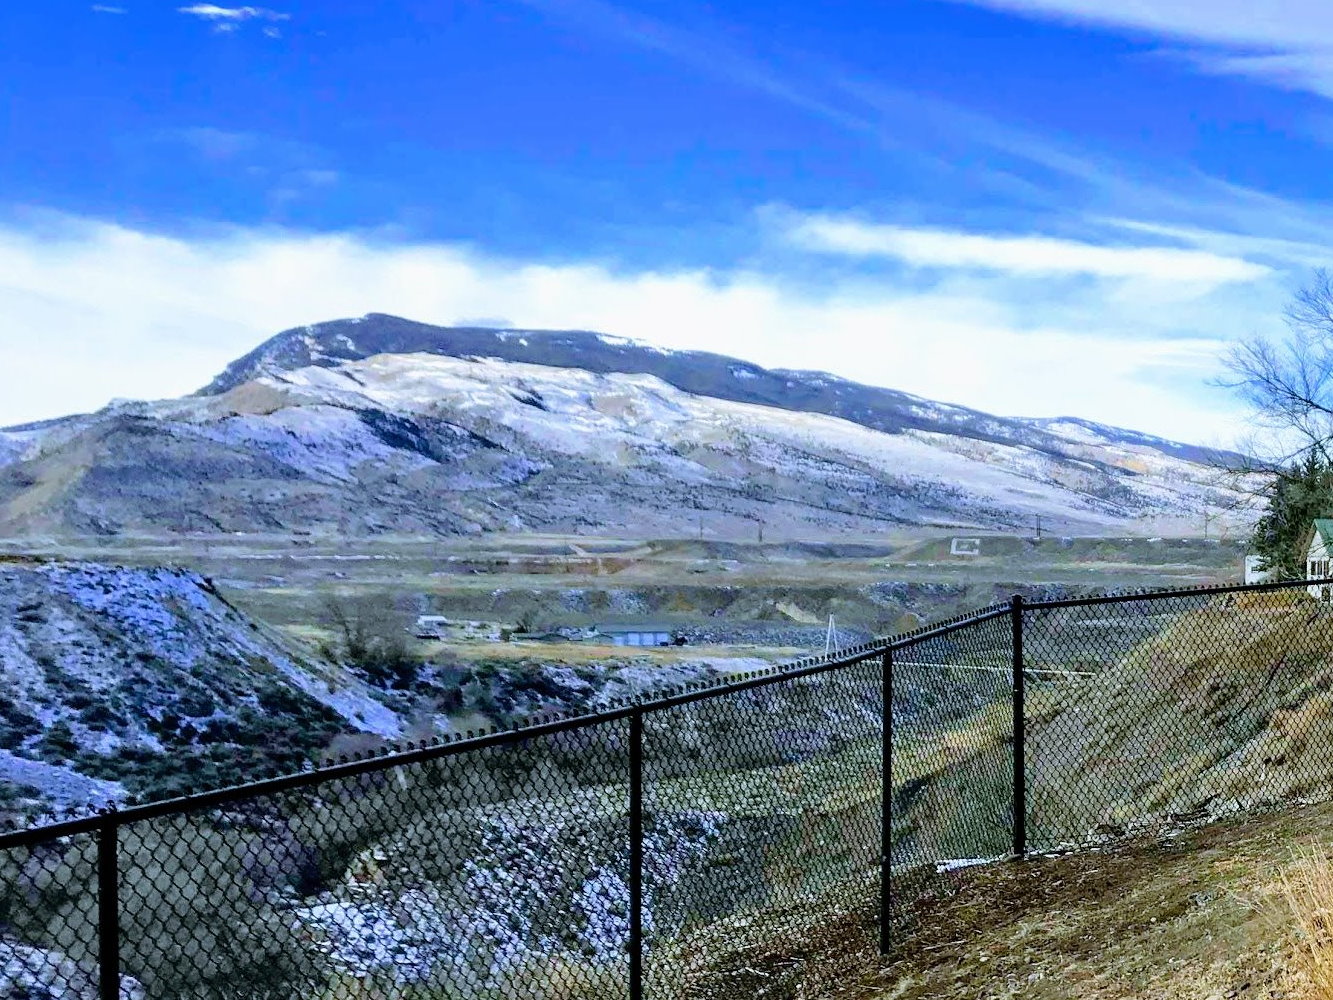 Hoback Wyoming commercial fencing company